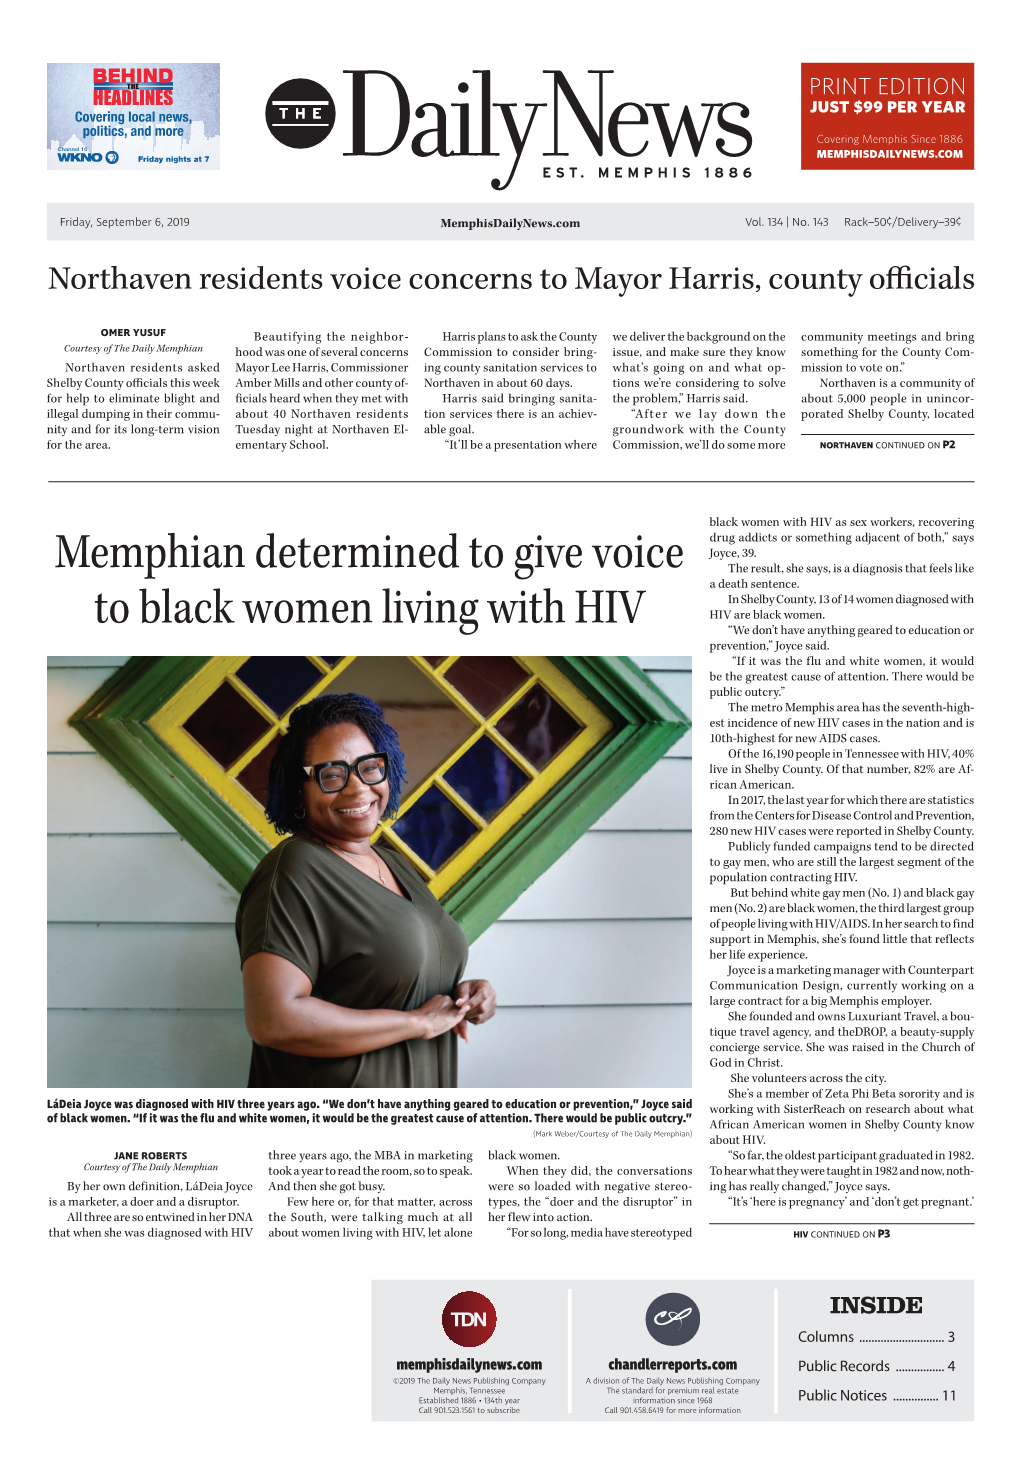 Memphian Determined to Give Voice to Black Women Living With